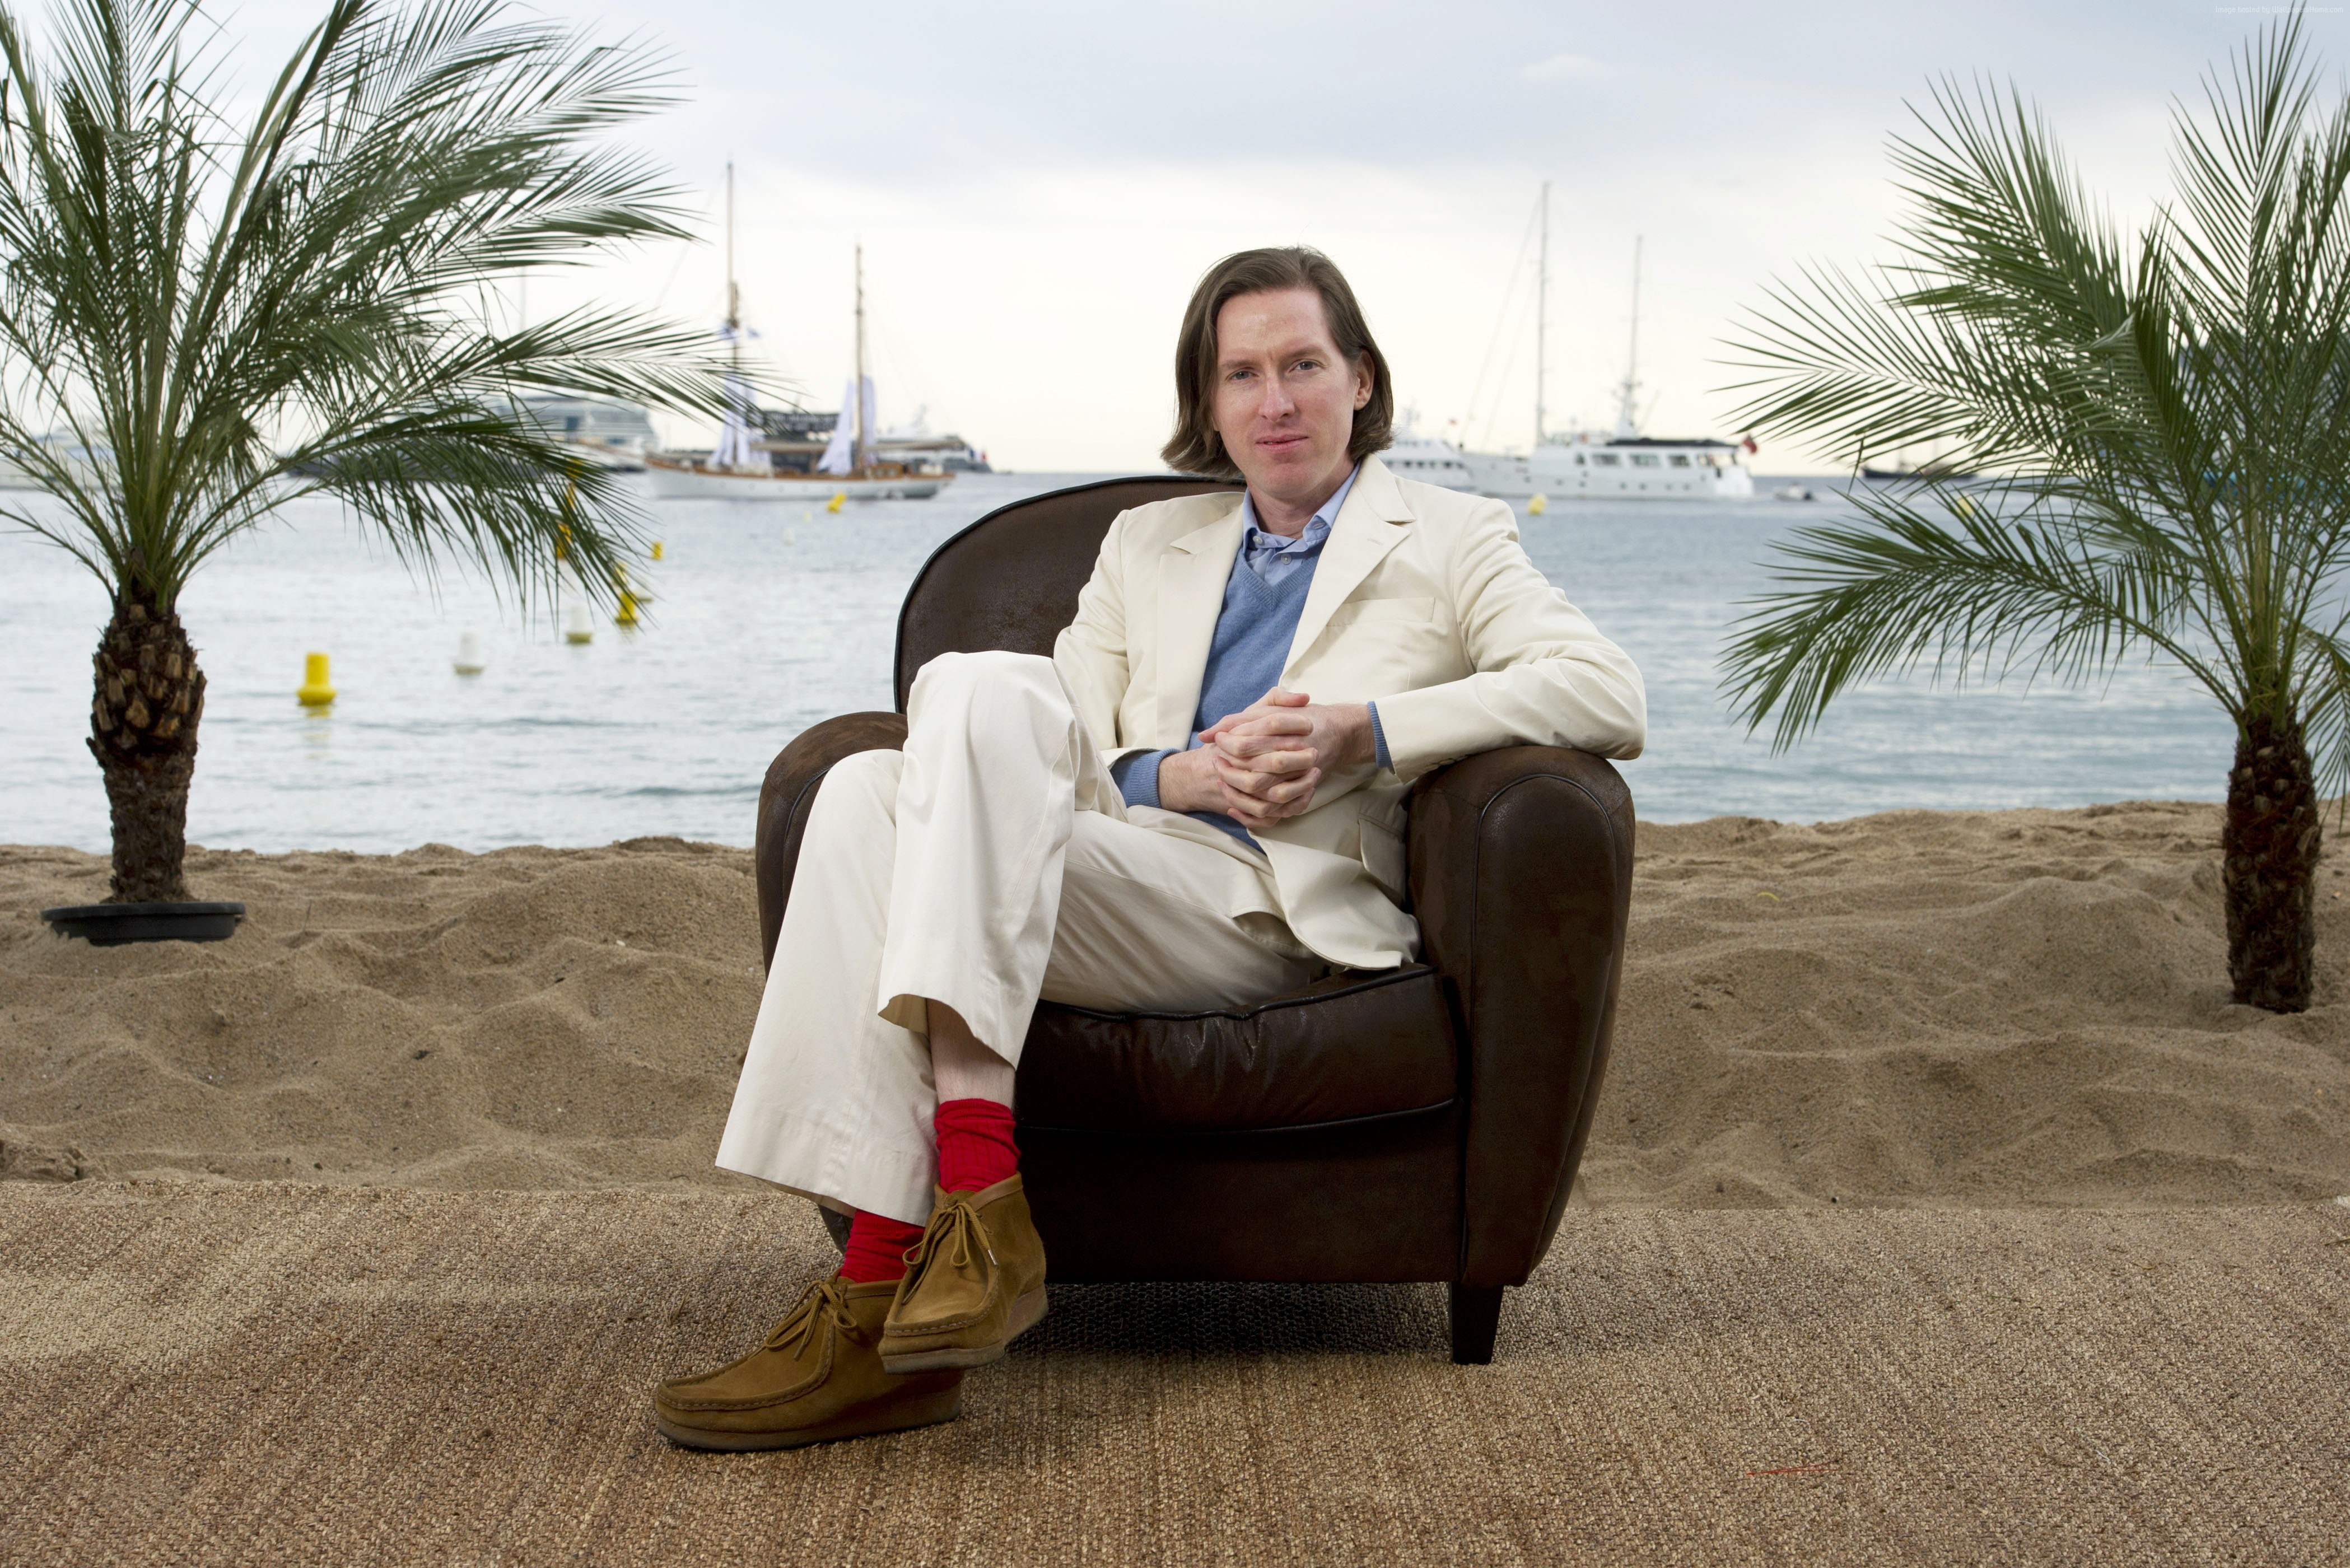 sand, producer, screenwriter, Wes Anderson, beach, film director